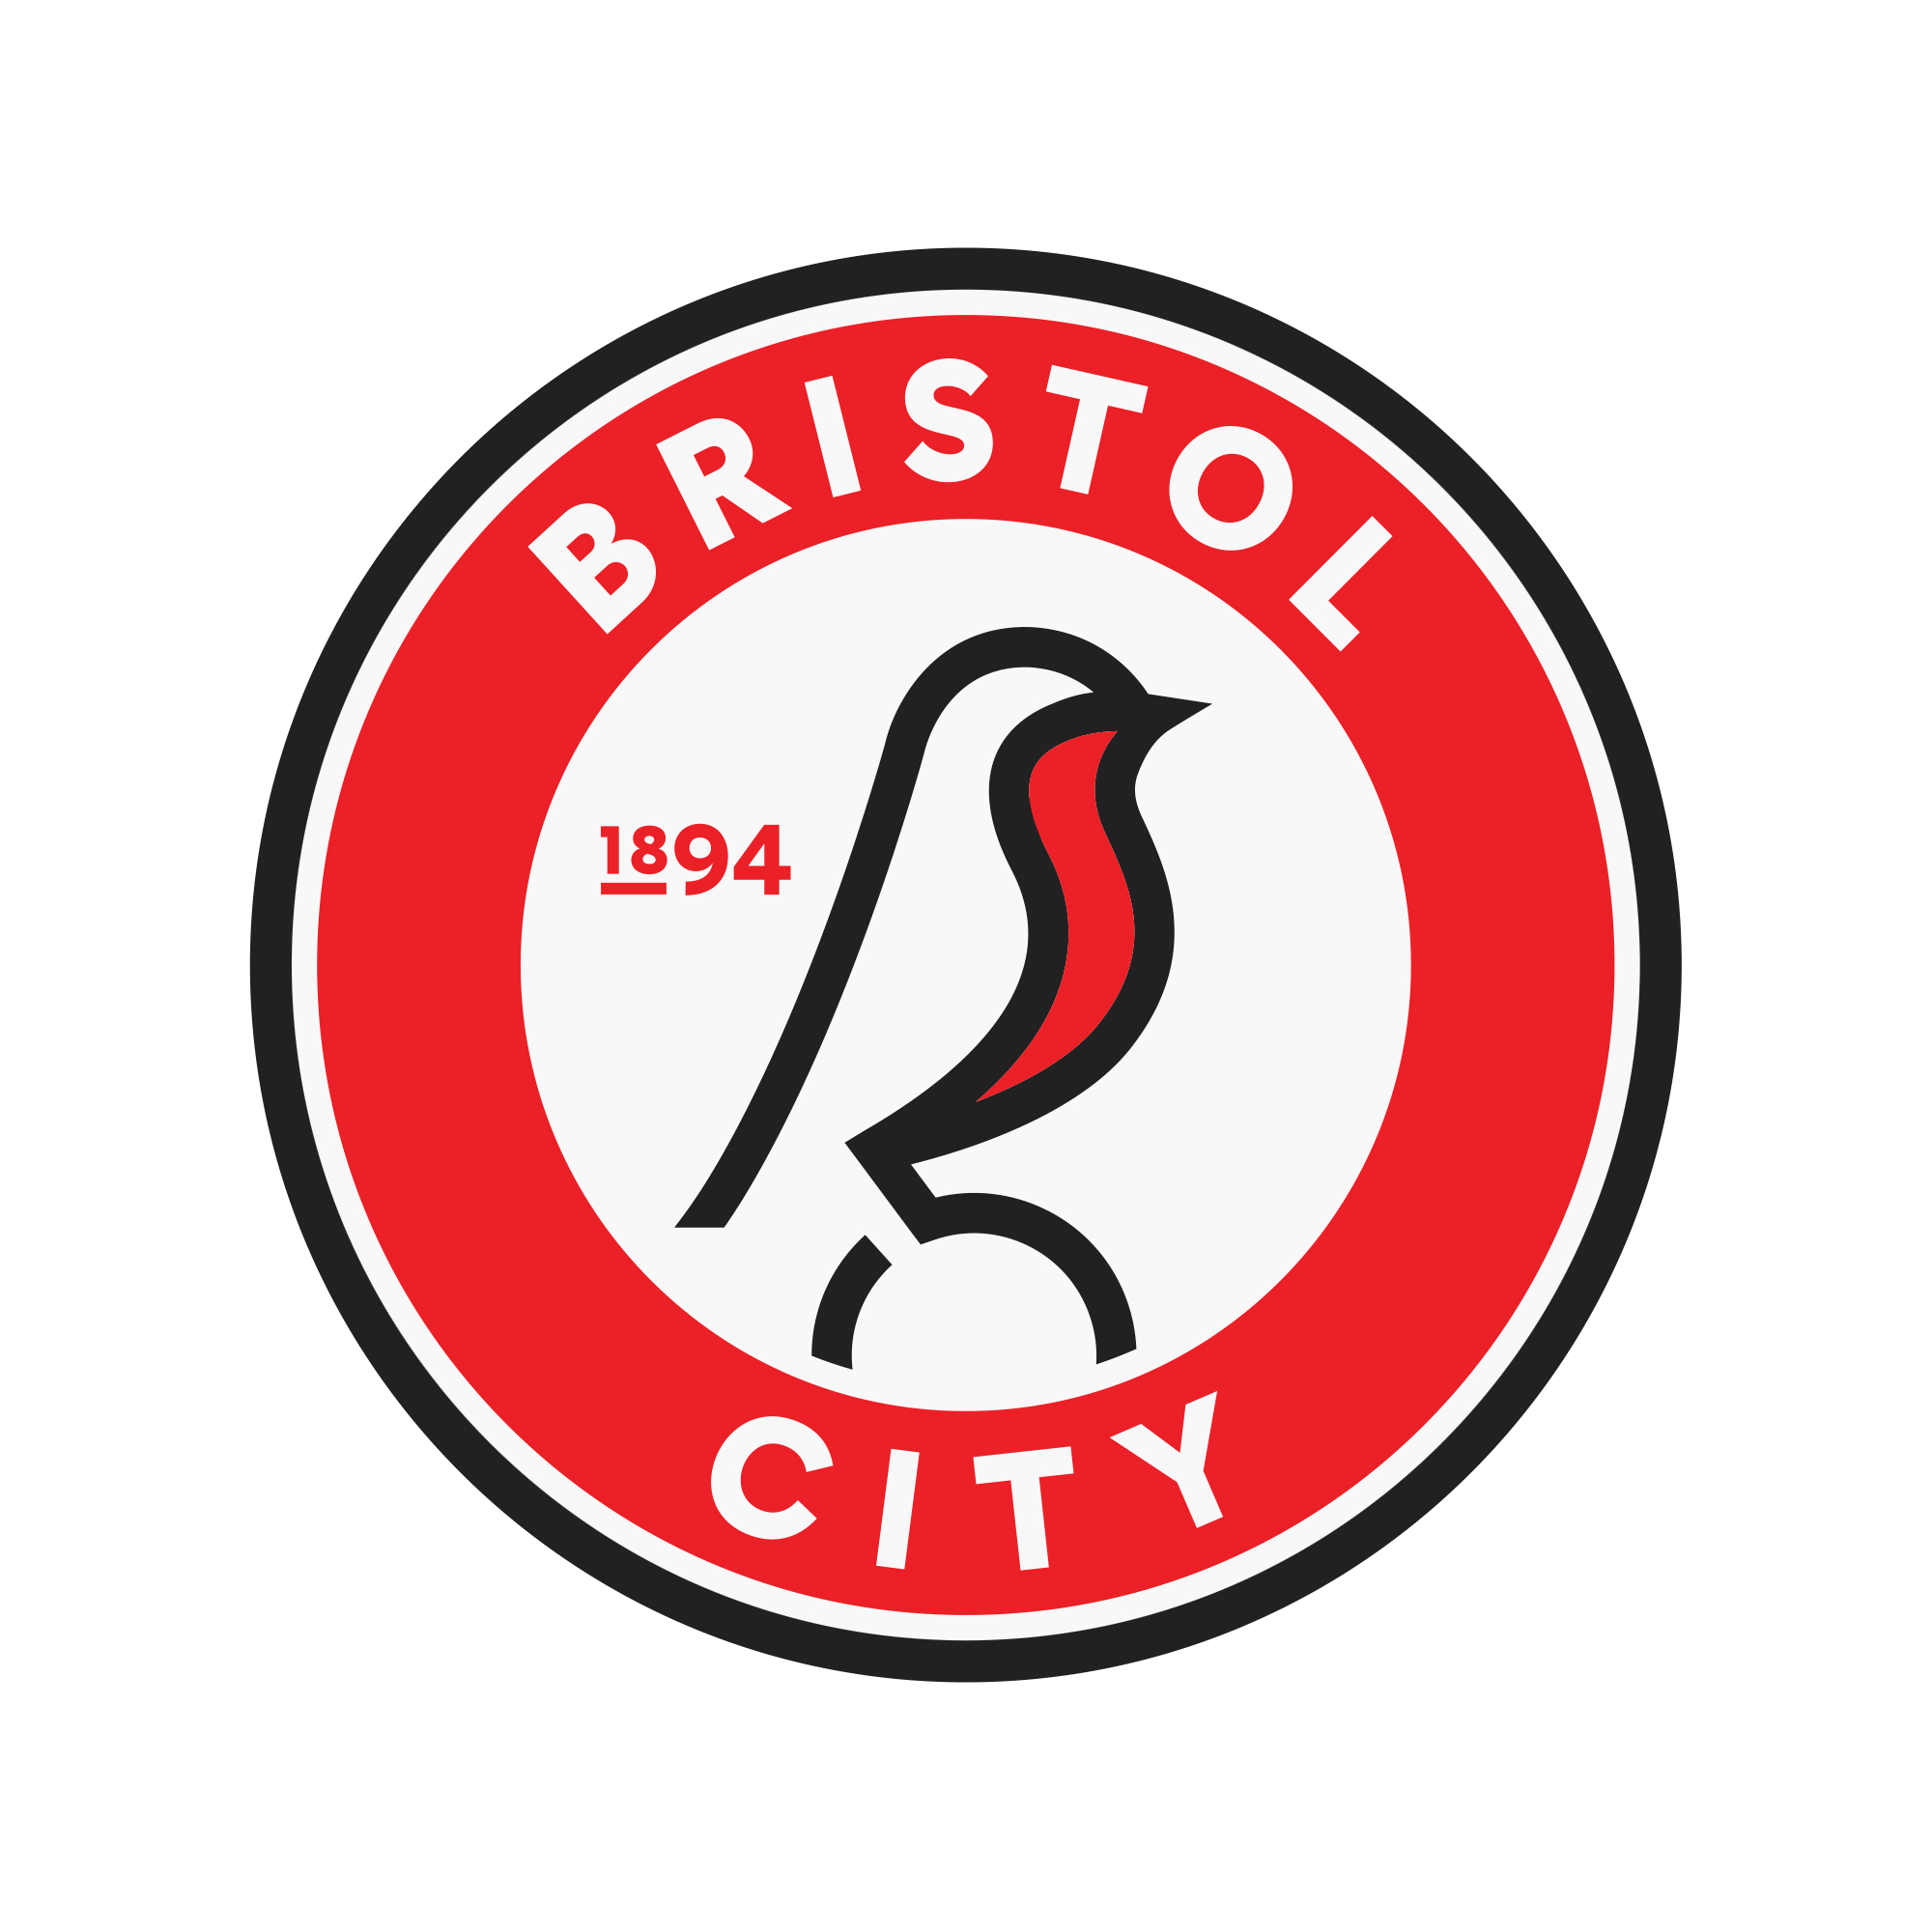 New Logo and Identity for Bristol City FC by Mr B & Friends